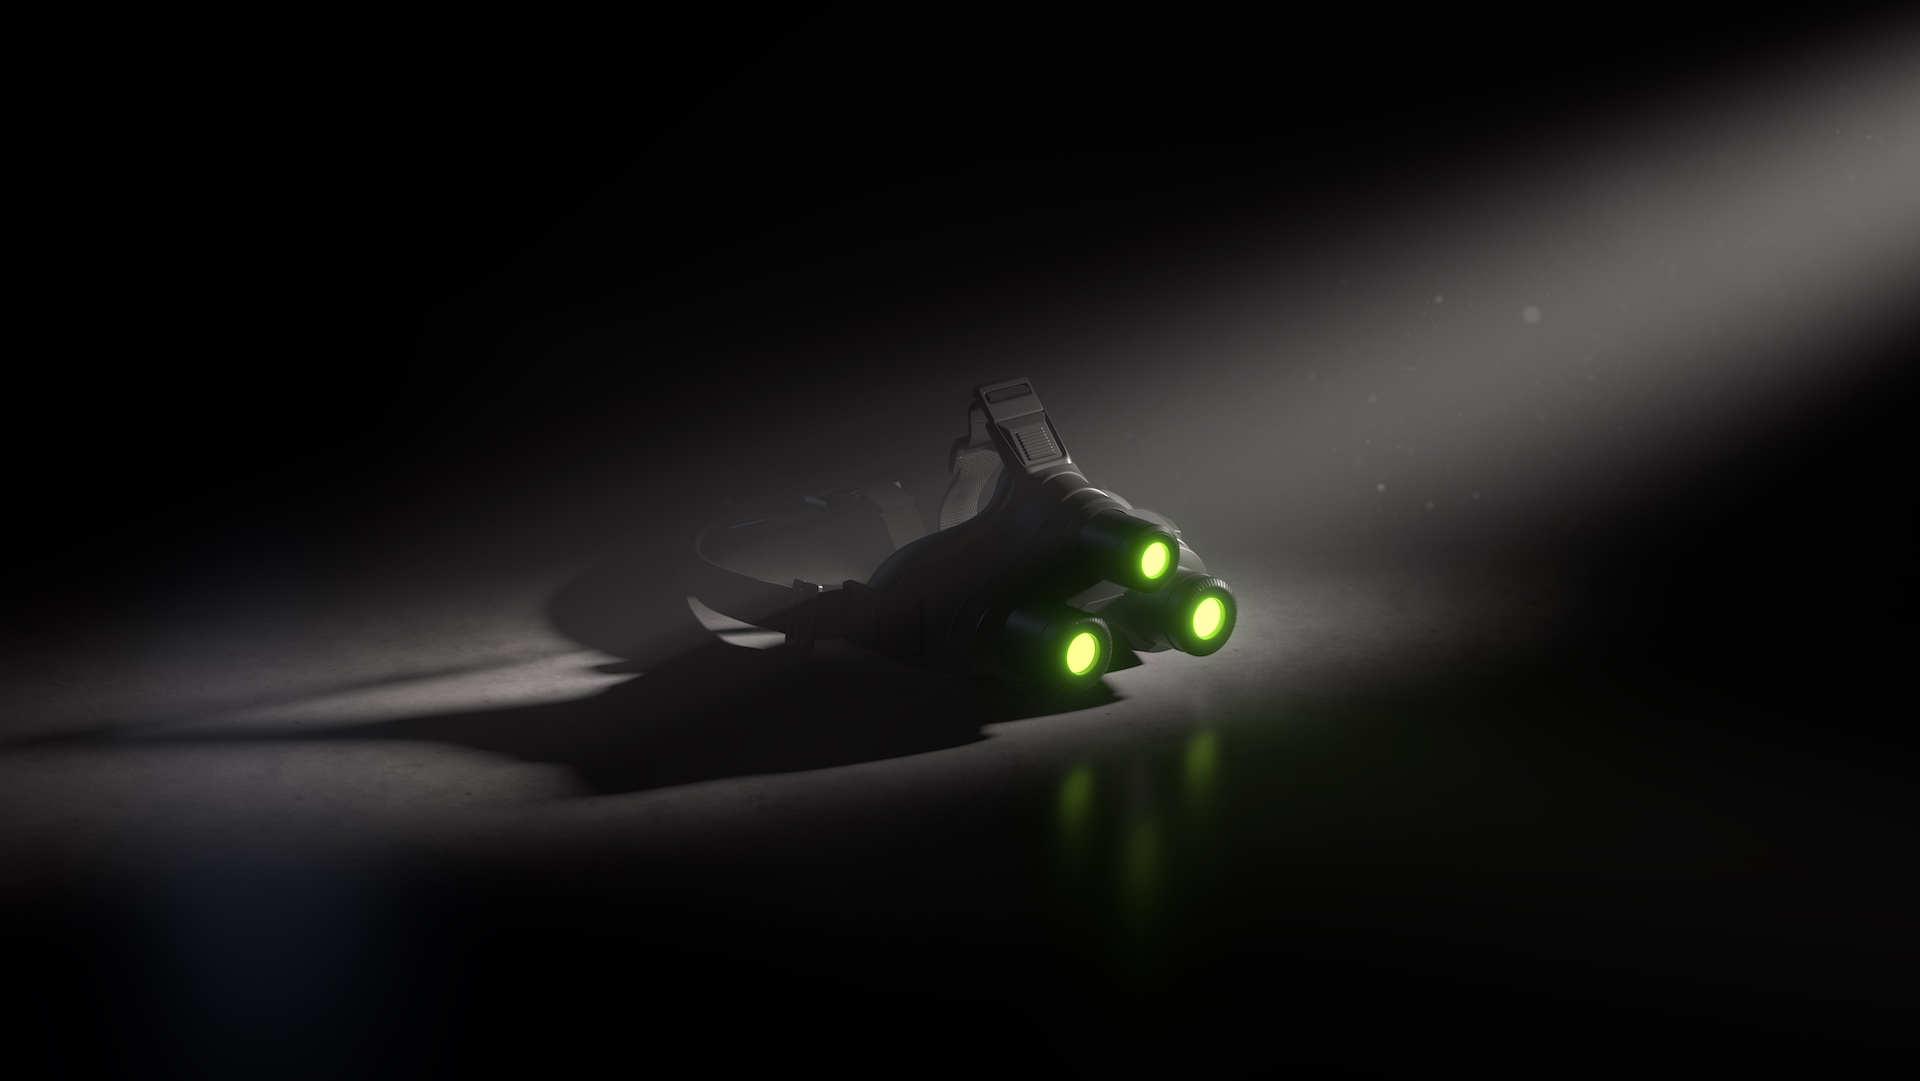 Sam Fisher’s trademark night vision goggles are lit by a beam of light in artwork for Splinter Cell’s 20th anniversary